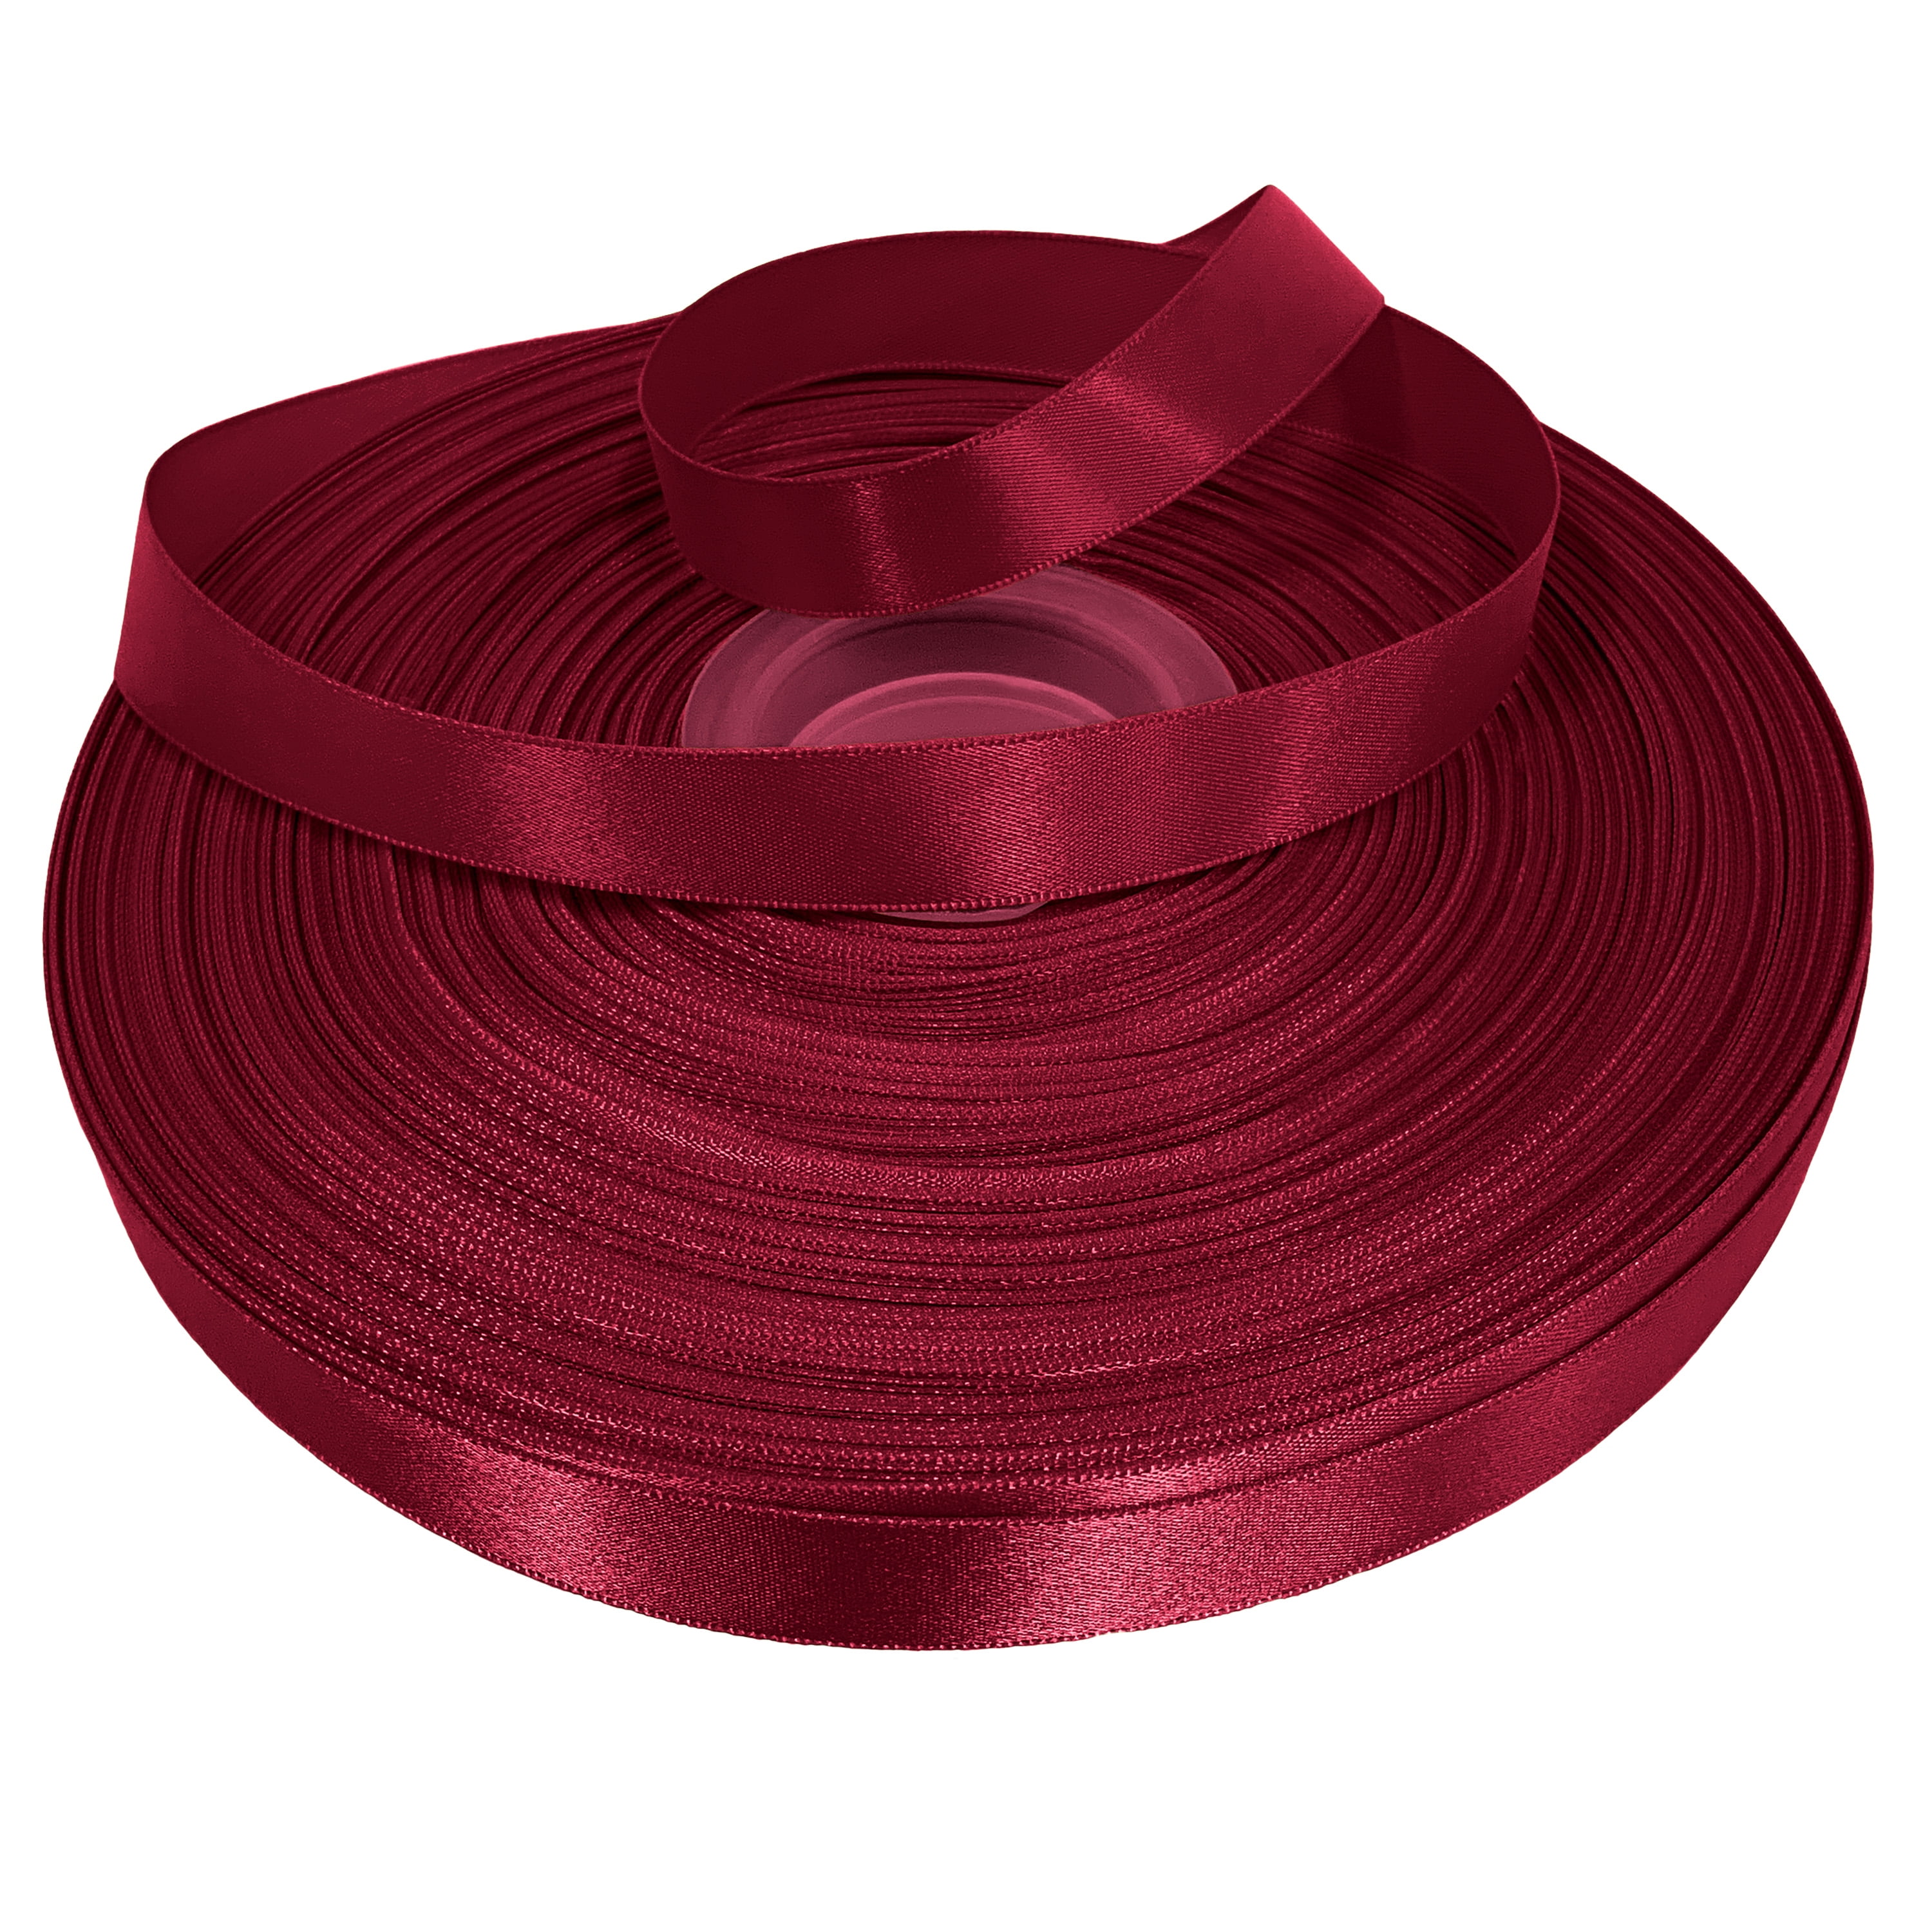 Burgundy Red Deluxe Satin Ribbon (1 1/2 Inch x 50 Yards